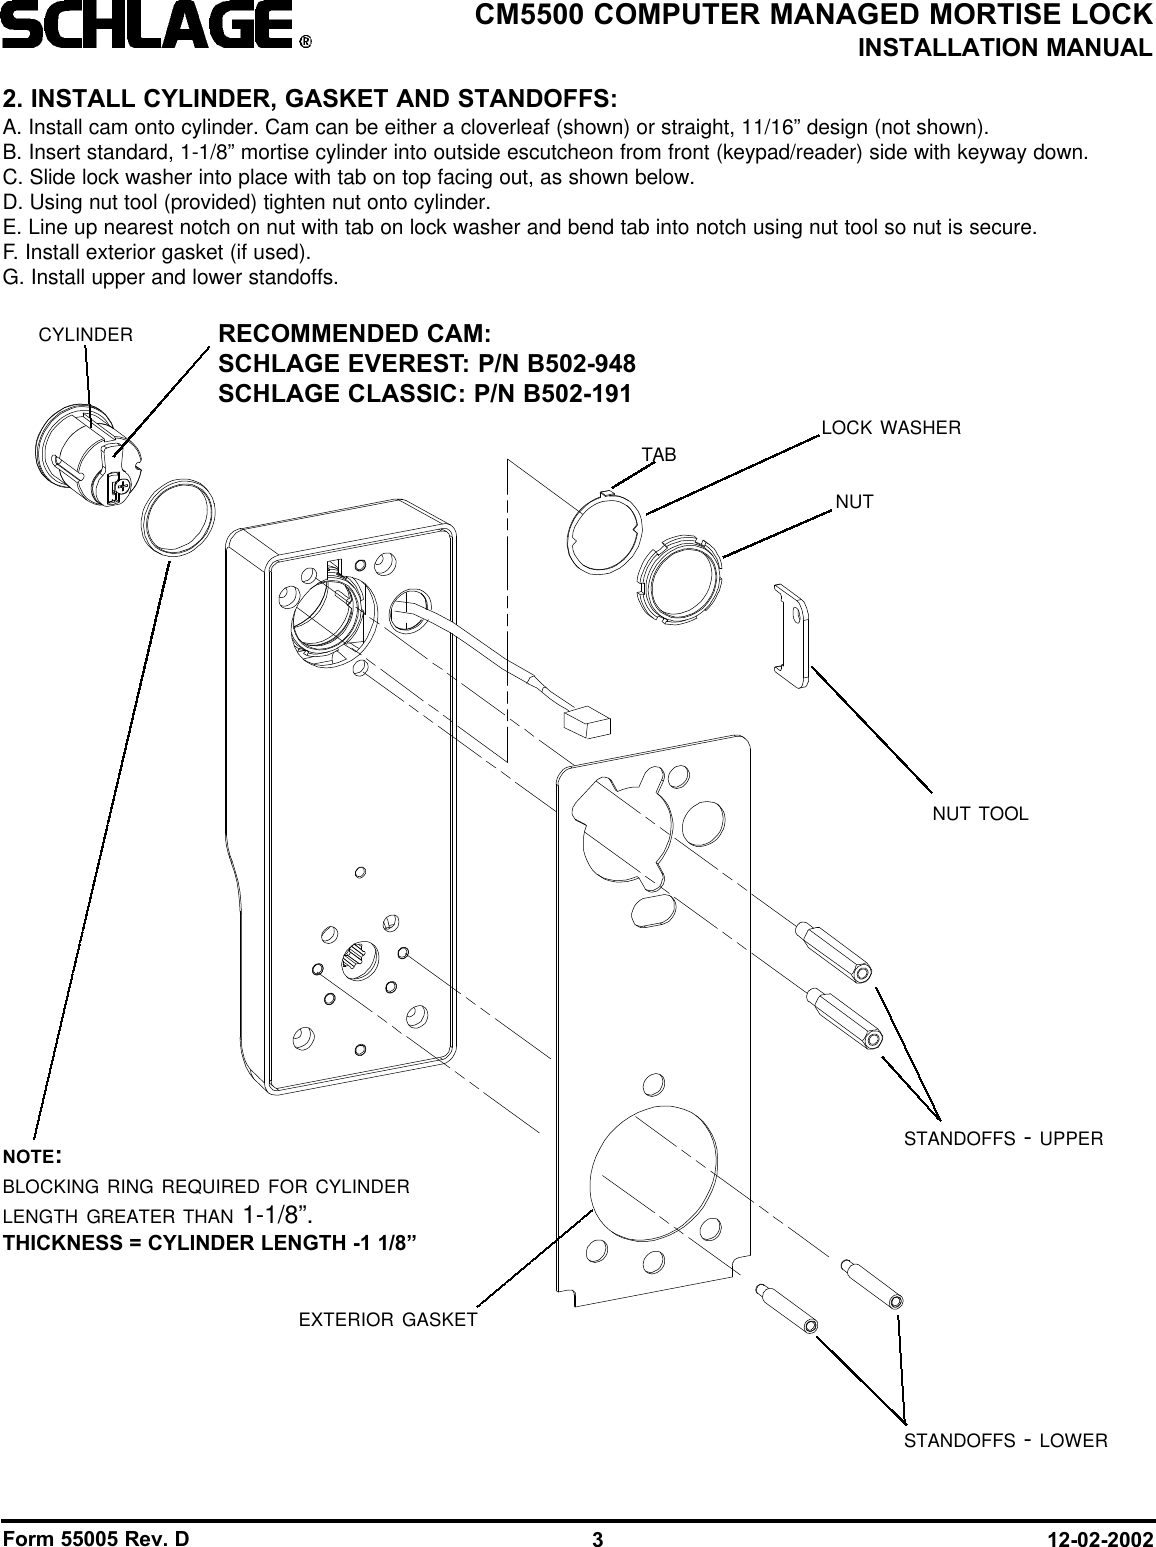 Form 55005 Rev. D 12-02-20023CM5500 COMPUTER MANAGED MORTISE LOCKINSTALLATION MANUAL2. INSTALL CYLINDER, GASKET AND STANDOFFS:A. Install cam onto cylinder. Cam can be either a cloverleaf (shown) or straight, 11/16” design (not shown).B. Insert standard, 1-1/8” mortise cylinder into outside escutcheon from front (keypad/reader) side with keyway down.C. Slide lock washer into place with tab on top facing out, as shown below.D. Using nut tool (provided) tighten nut onto cylinder.E. Line up nearest notch on nut with tab on lock washer and bend tab into notch using nut tool so nut is secure. F. Install exterior gasket (if used).G. Install upper and lower standoffs.CYLINDER RECOMMENDED CAM:SCHLAGE EVEREST: P/N B502-948SCHLAGE CLASSIC: P/N B502-191NUT TOOLEXTERIOR GASKETLOCK WASHERNUTSTANDOFFS - UPPERSTANDOFFS - LOWERTABNOTE:BLOCKING RING REQUIRED FOR CYLINDERLENGTH GREATER THAN 1-1/8”.THICKNESS = CYLINDER LENGTH -1 1/8”